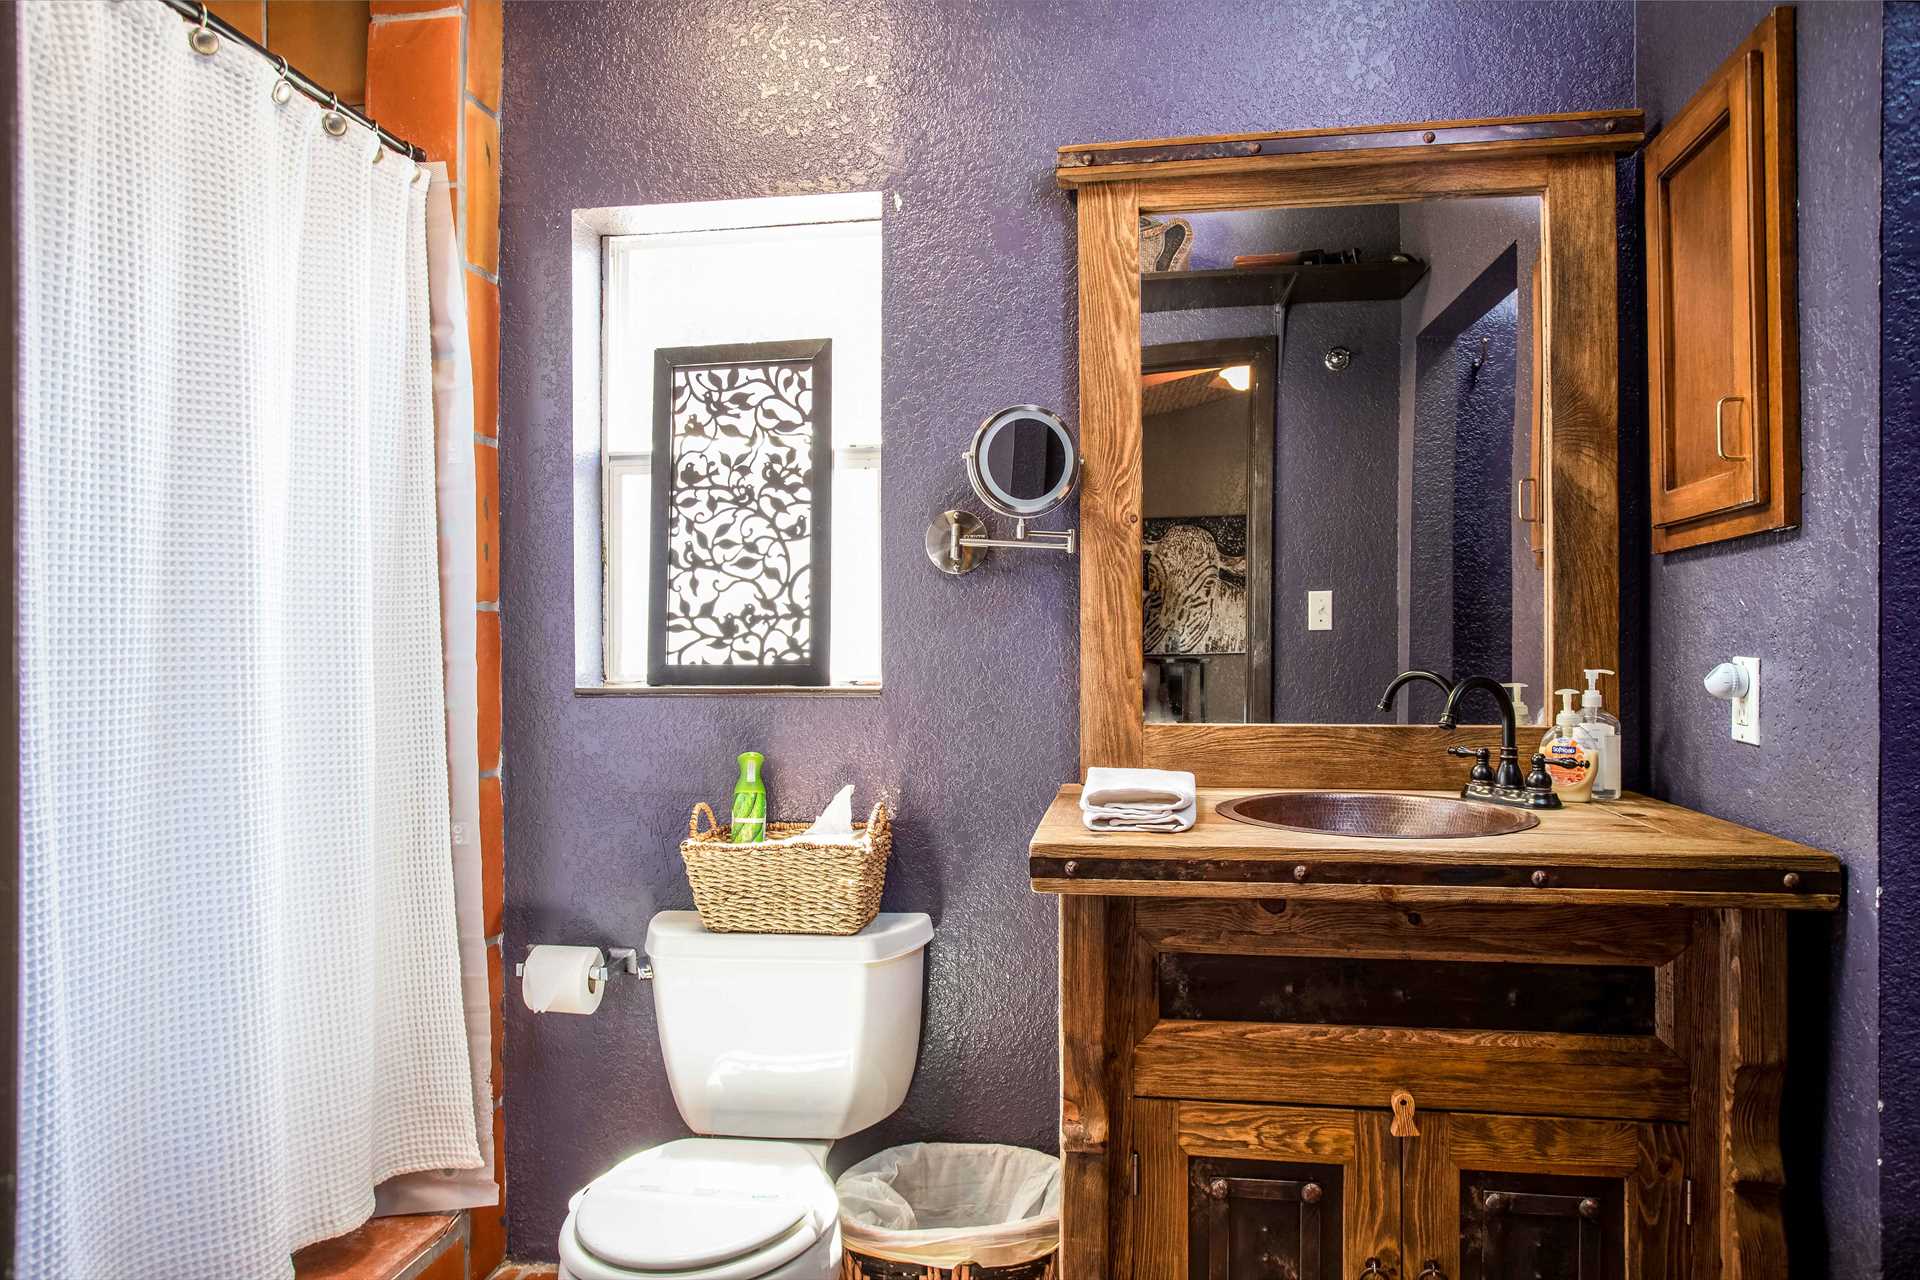                                                 An amazing and rustic wooden vanity graces the full bath, as well as a sparkling clean shower stall, and plenty of clean linens!